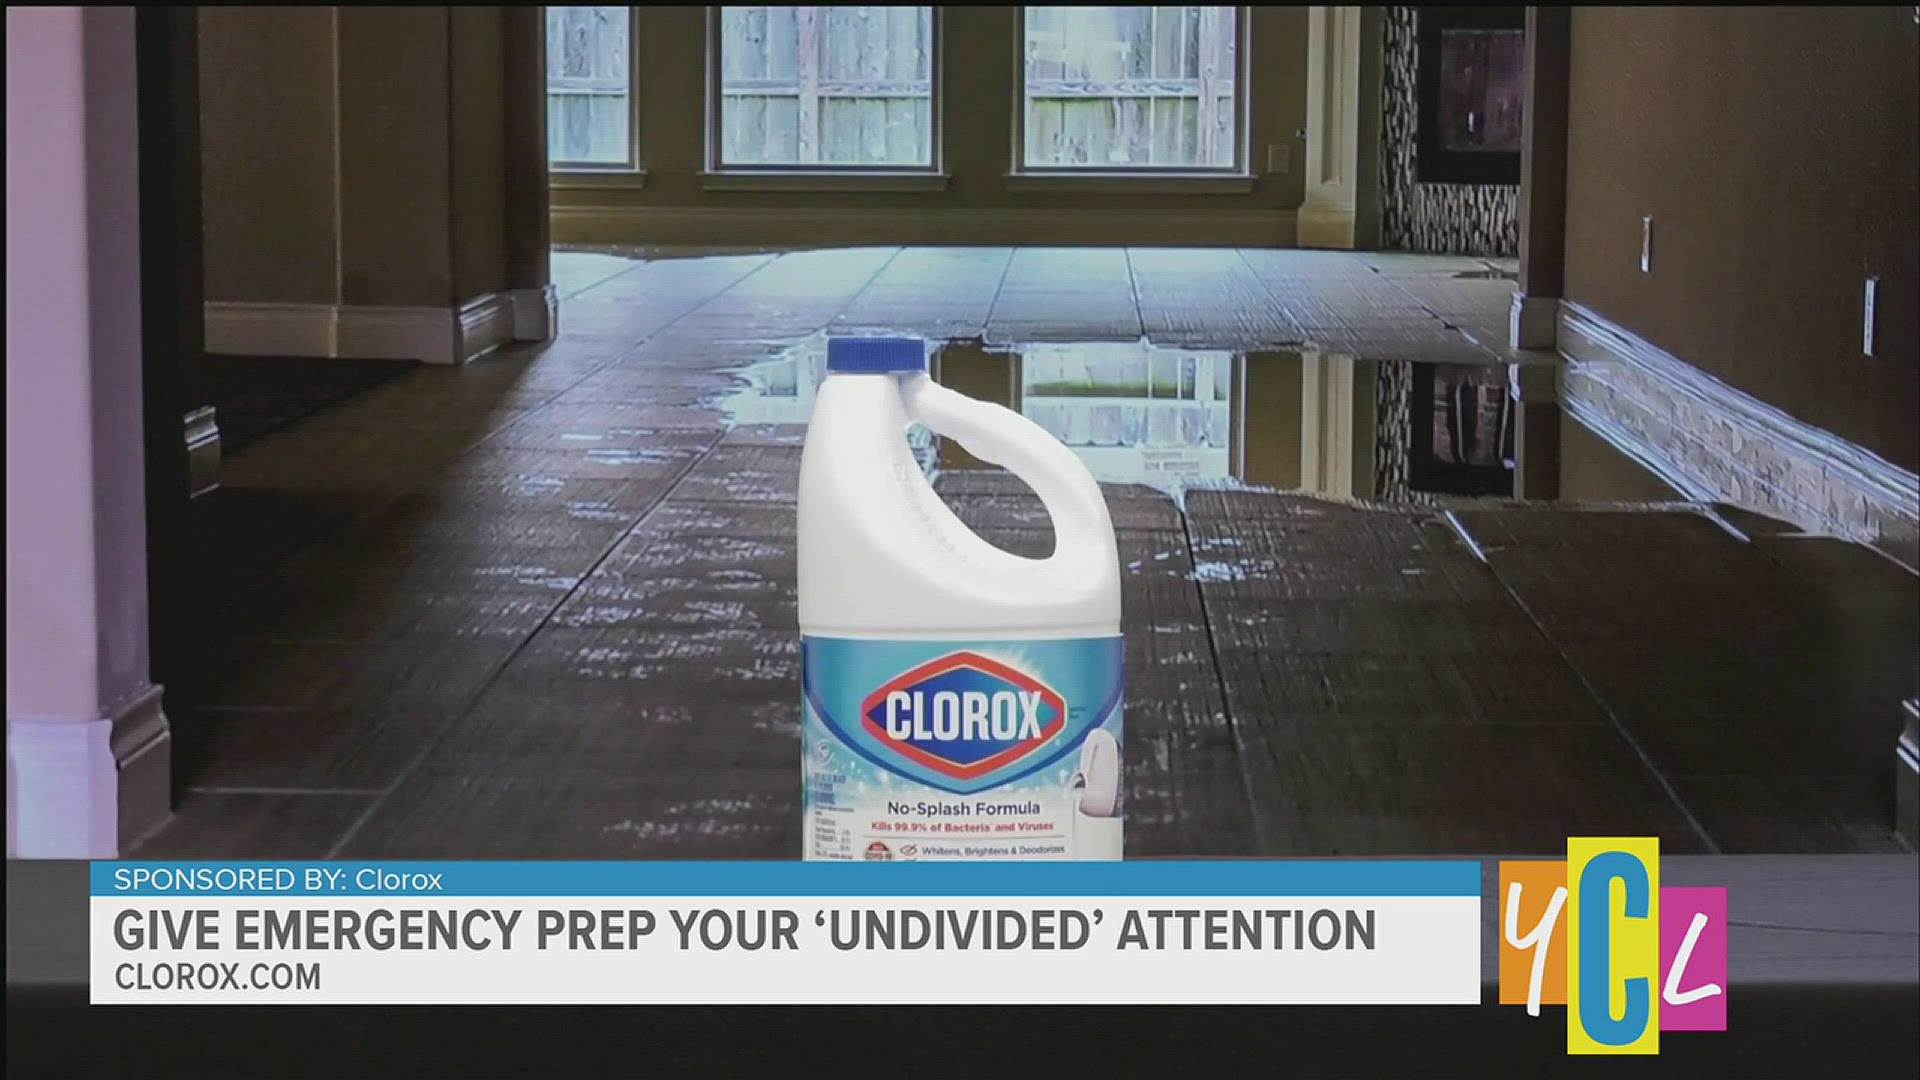 Learn how a few simple precautions can make a big difference during natural disasters or weather emergencies. This segment is paid for by Clorox.